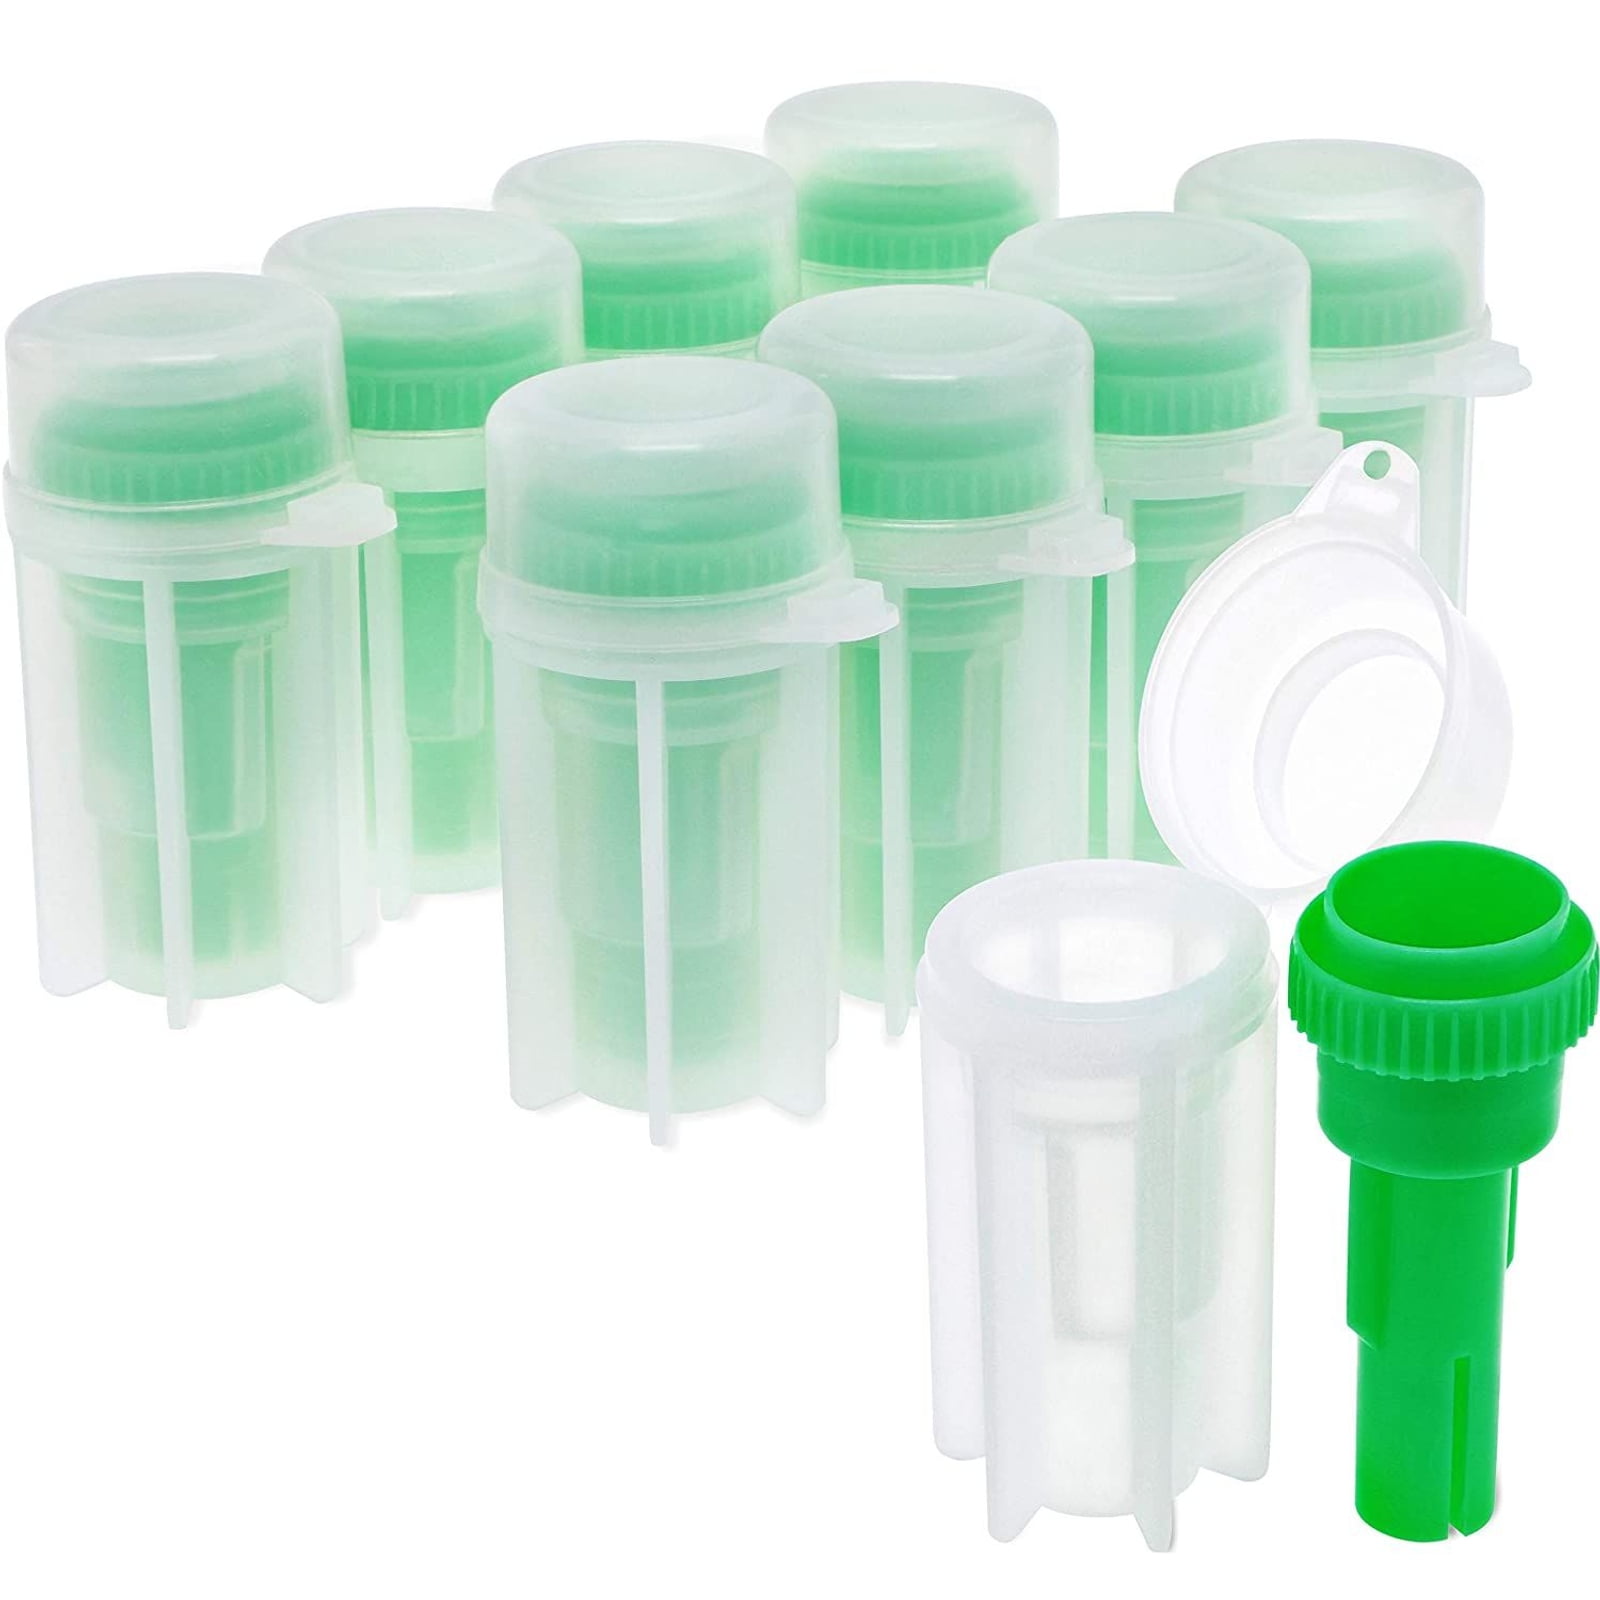 How To Collect Stool Sample For Vet